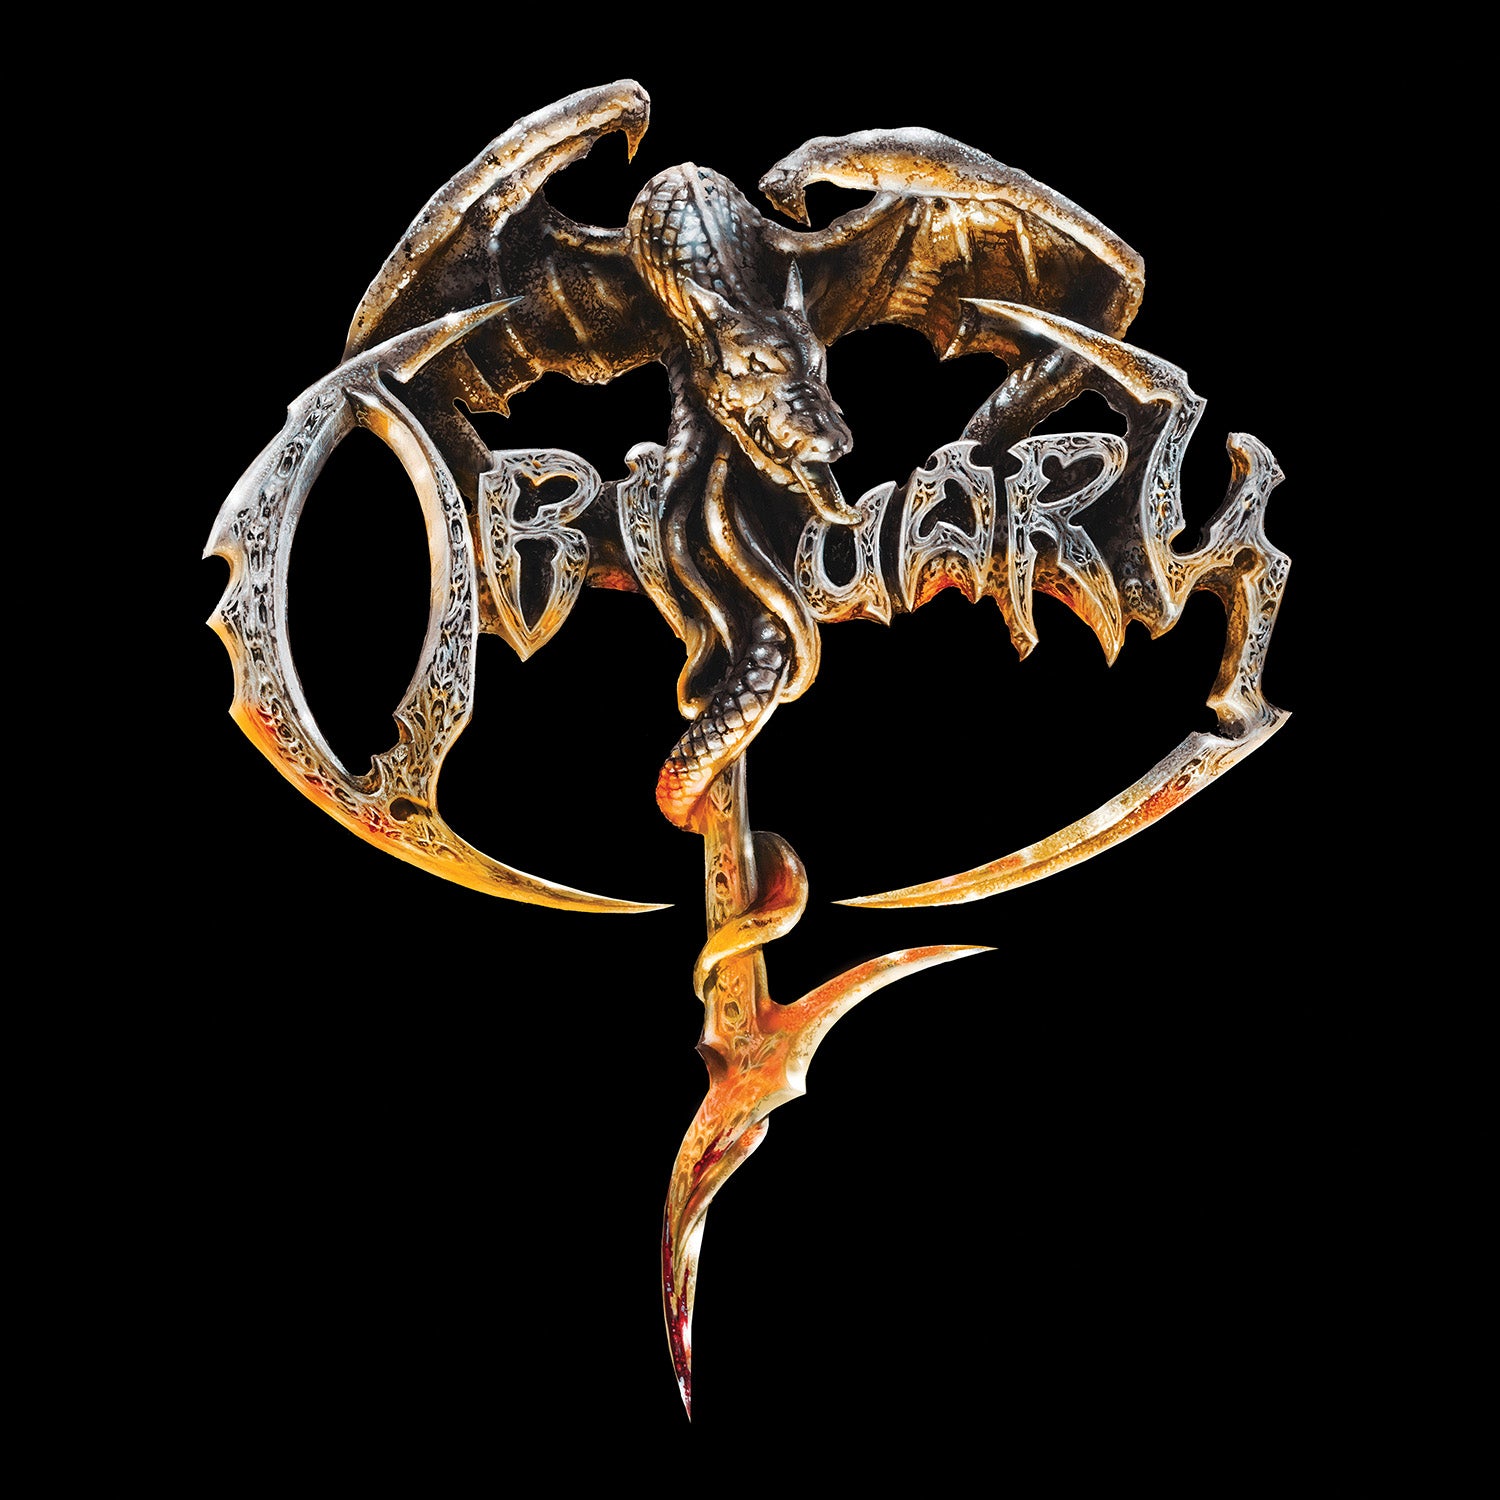 Obituary 12" – Official Store